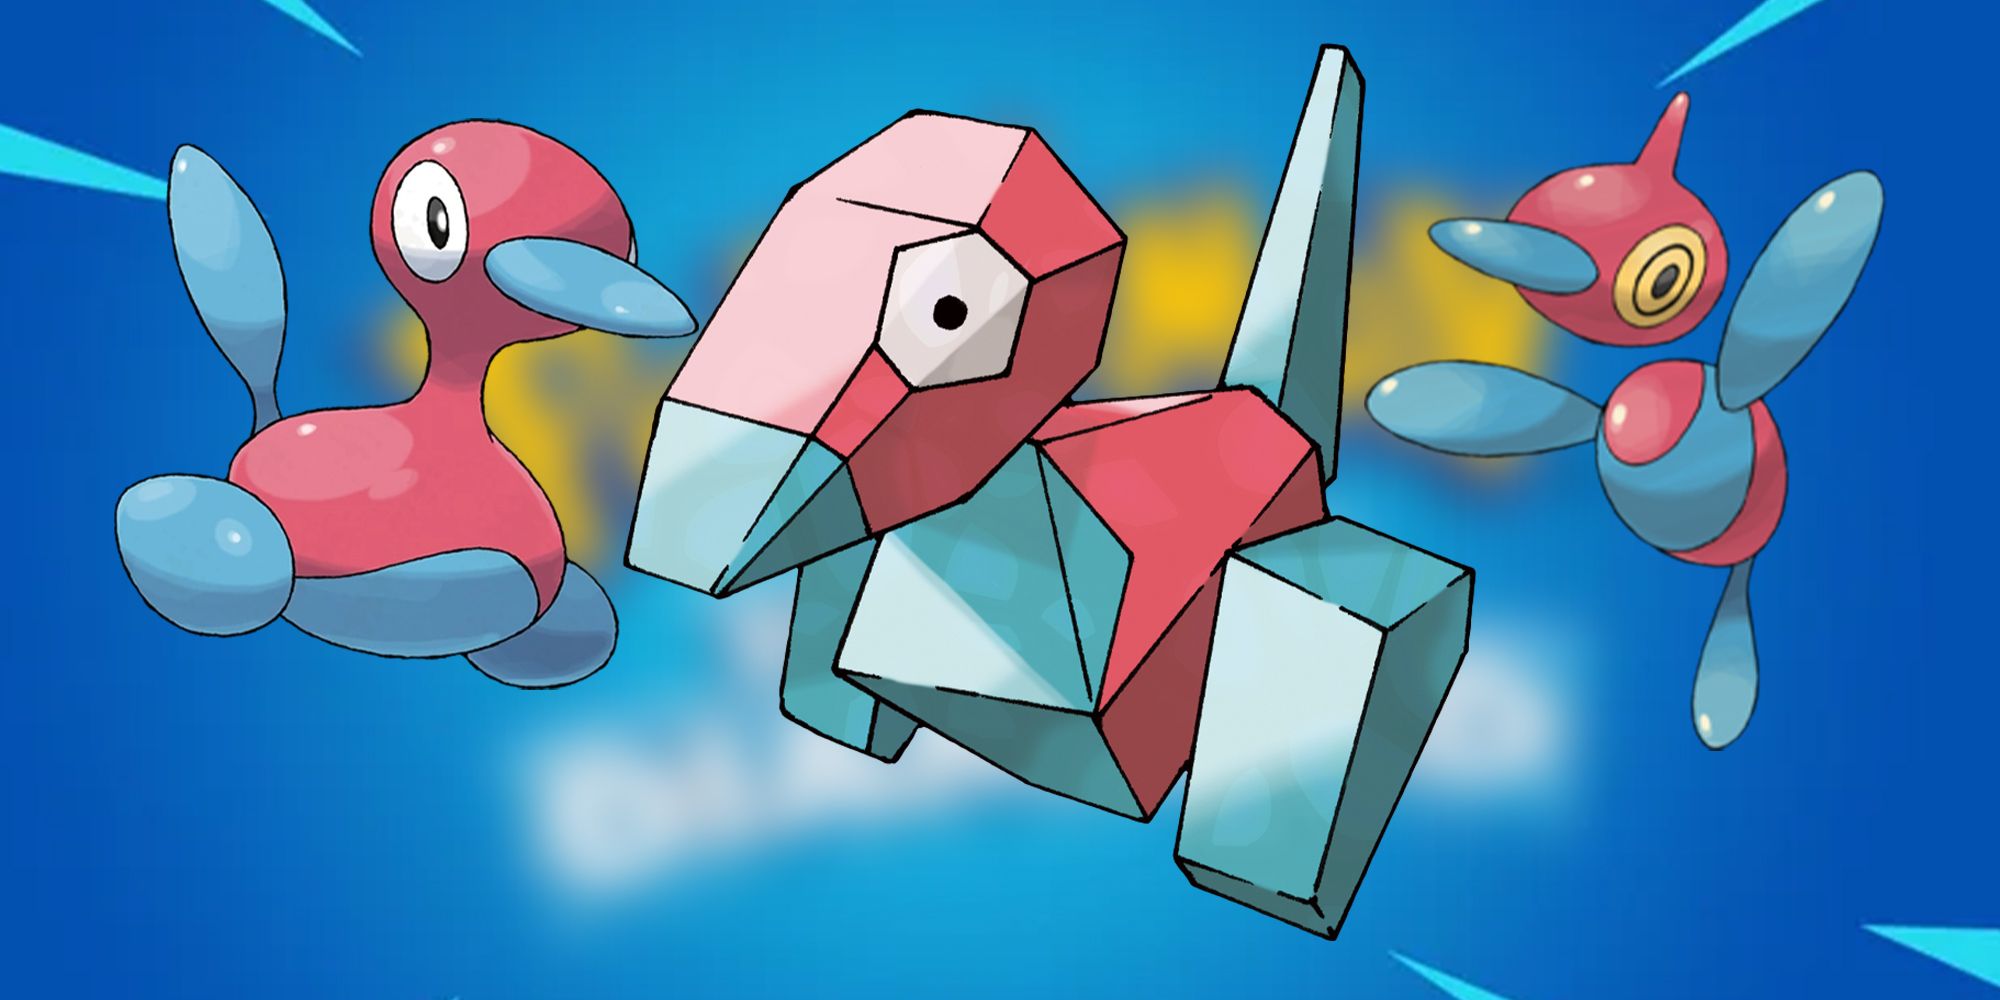 Players can find and capture Porygon, Porygon2, and Porygon-Z in Pokémon BD...